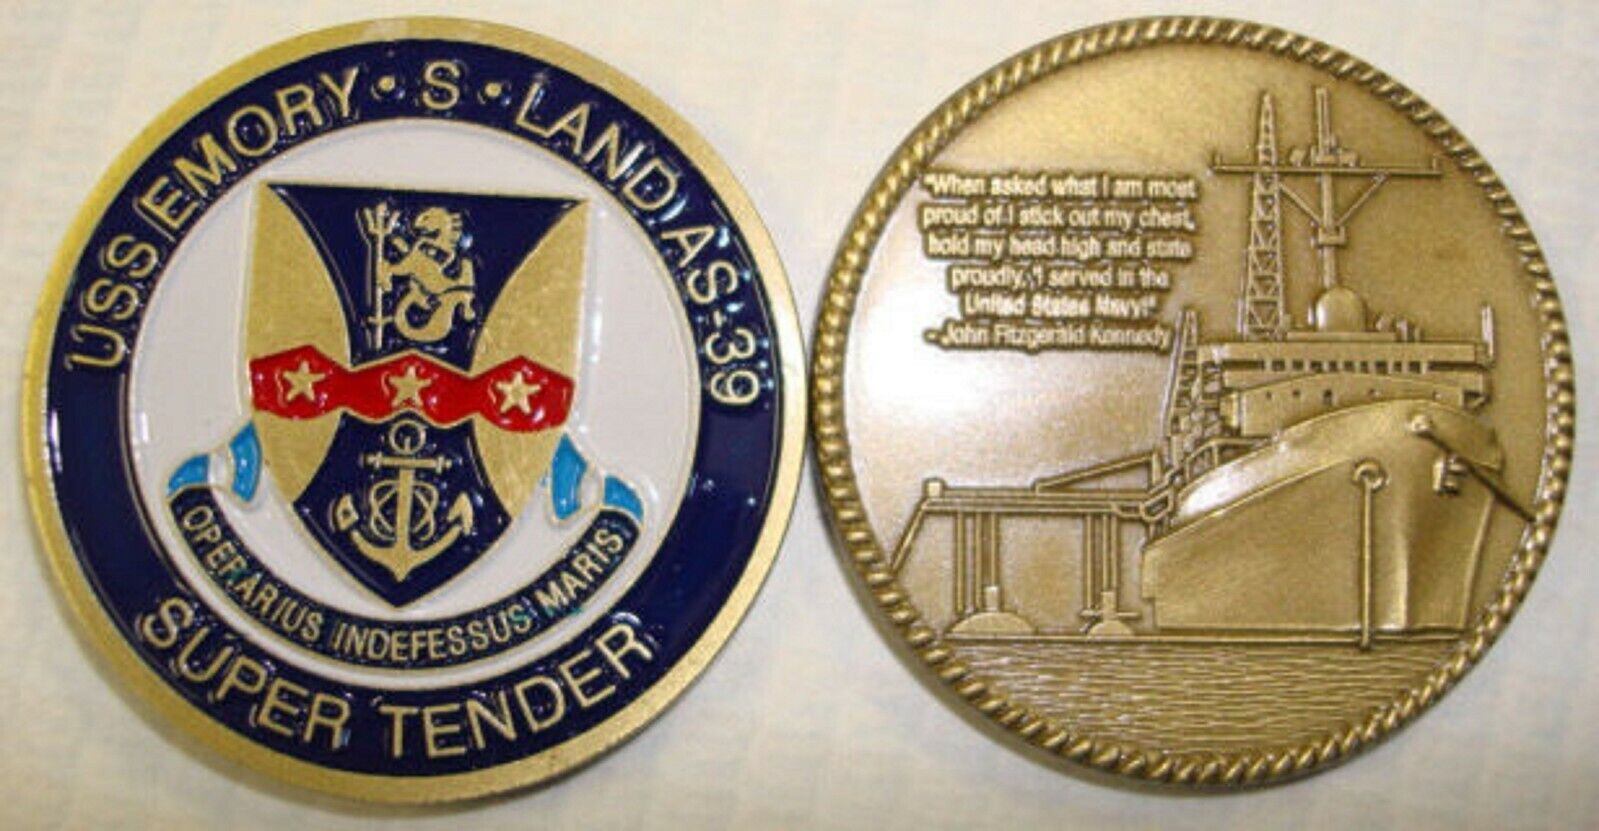 NAVY SUBMARINE USS EMORY S LAND AS-39  MILITARY SUPER TENDER CHALLENGE COIN